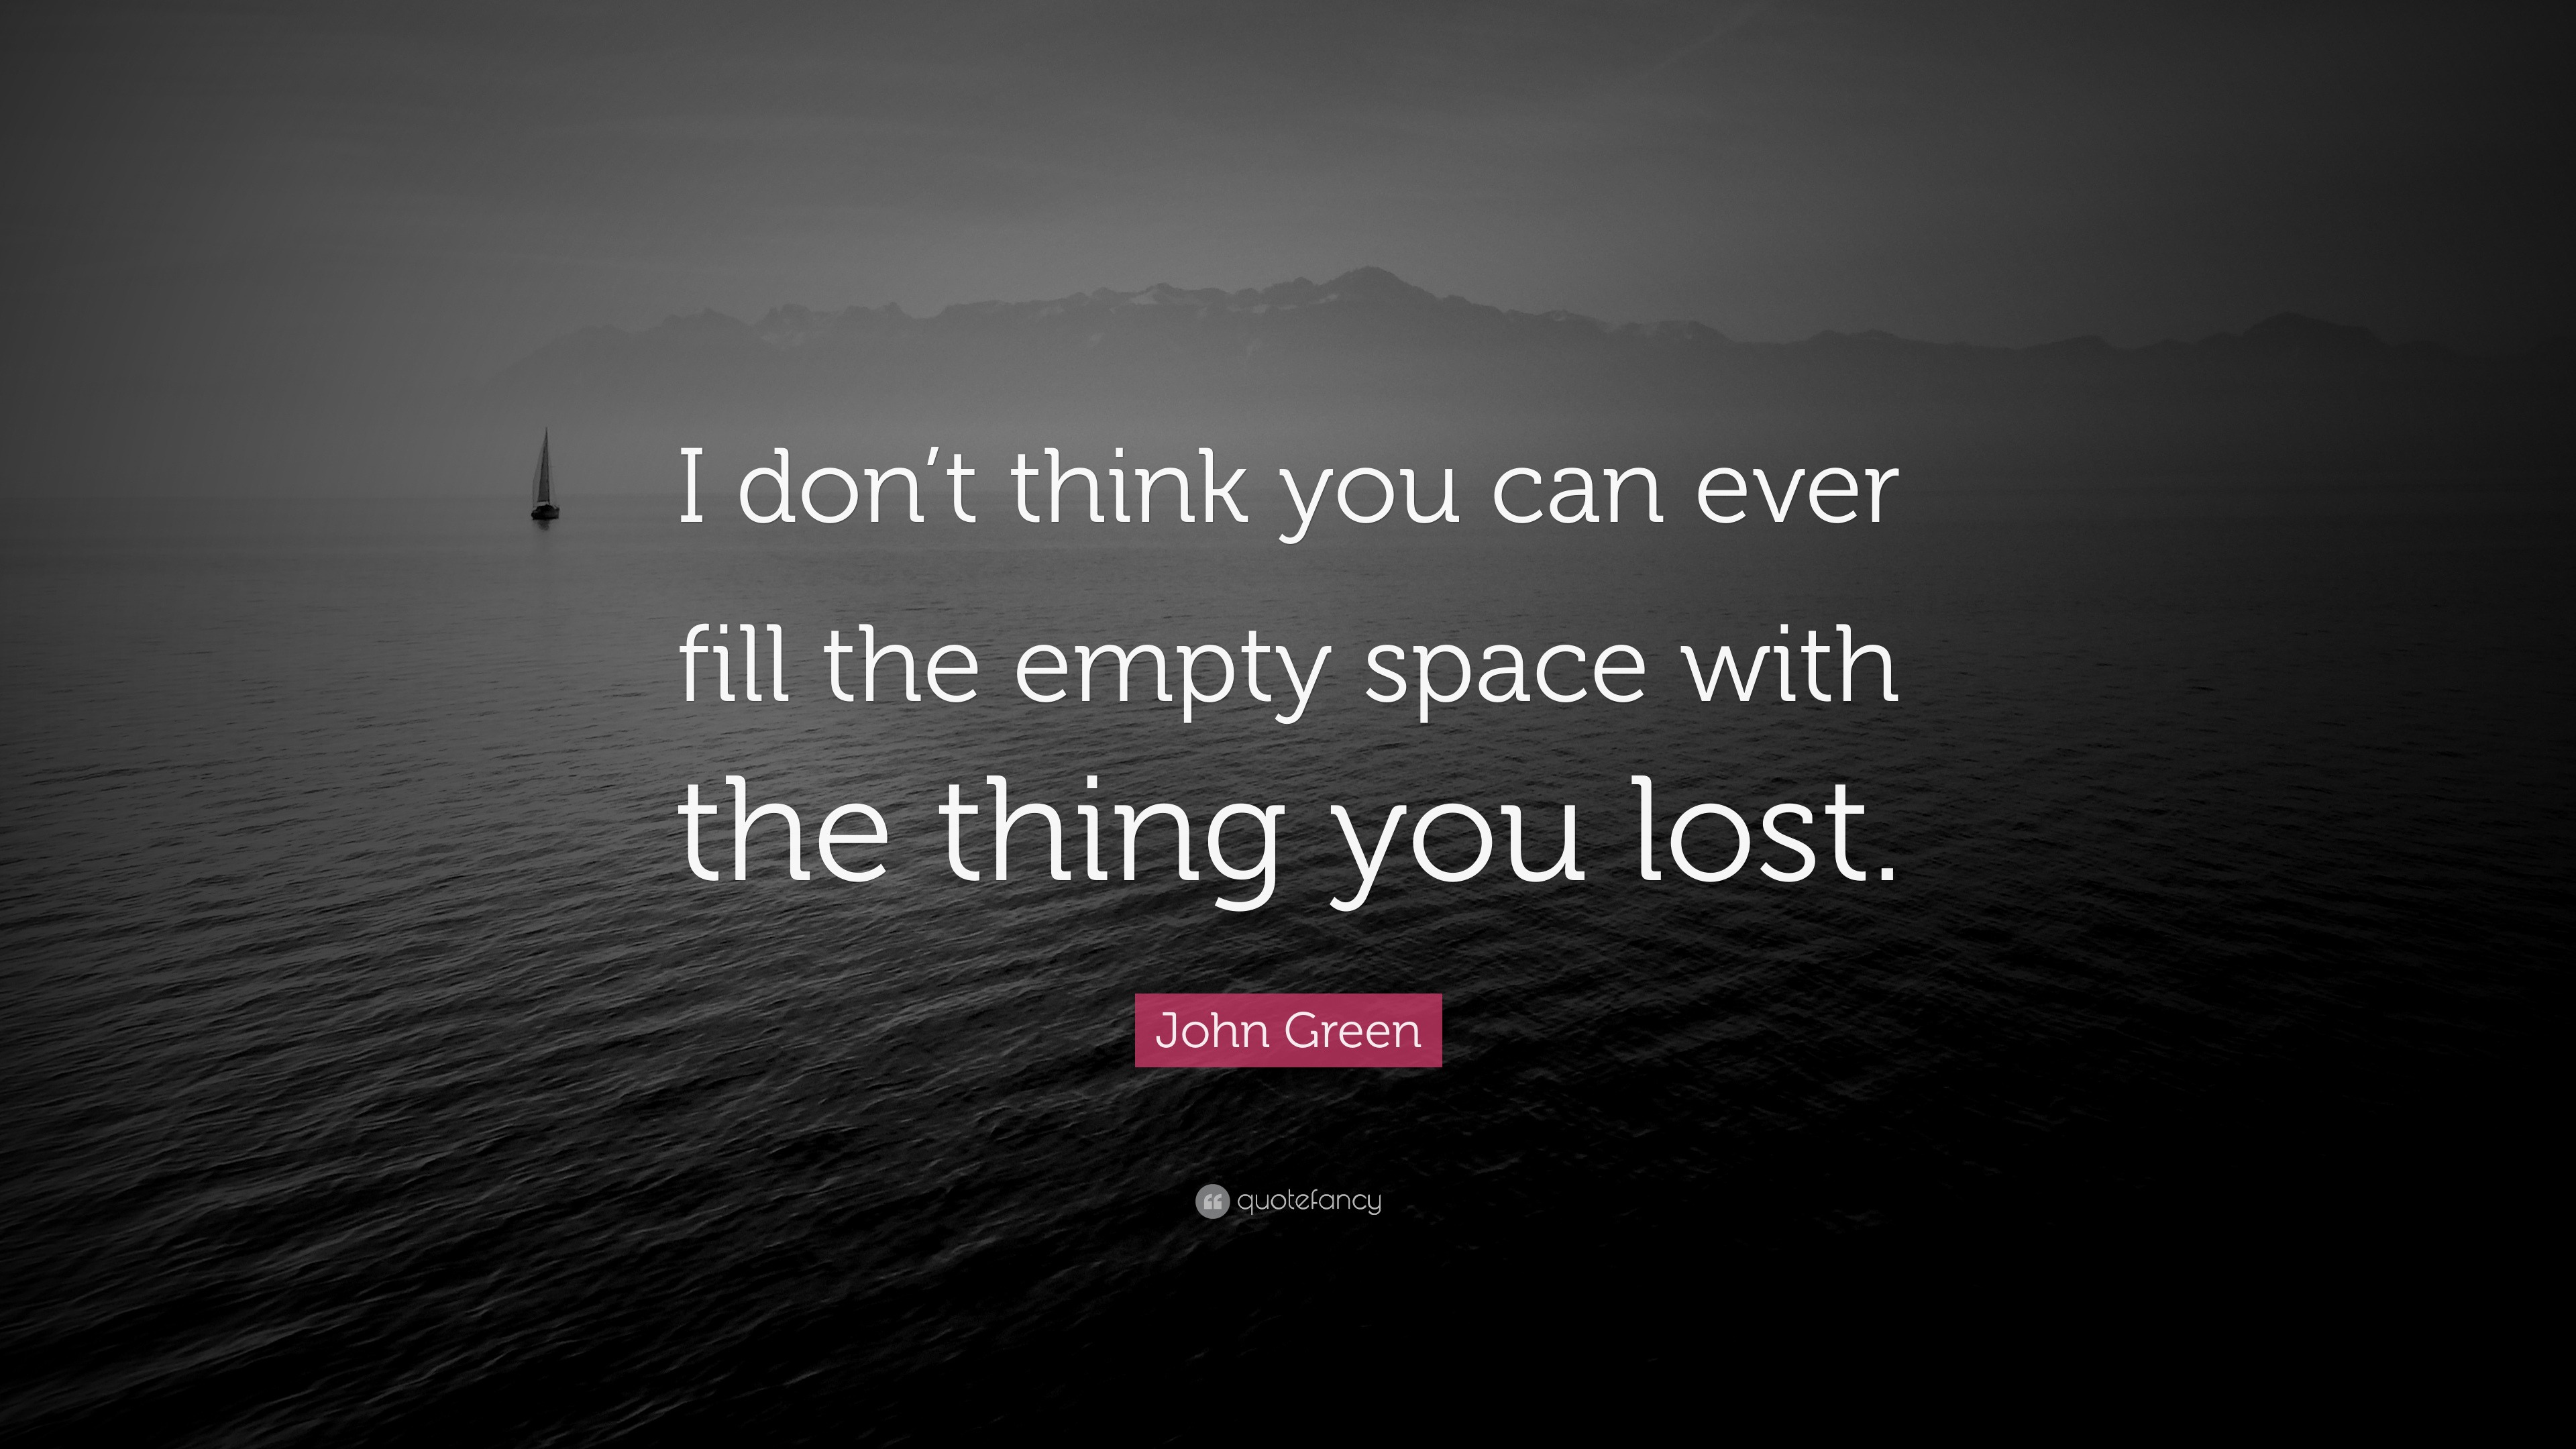 John Green Quote: “I don’t think you can ever fill the empty space with ...